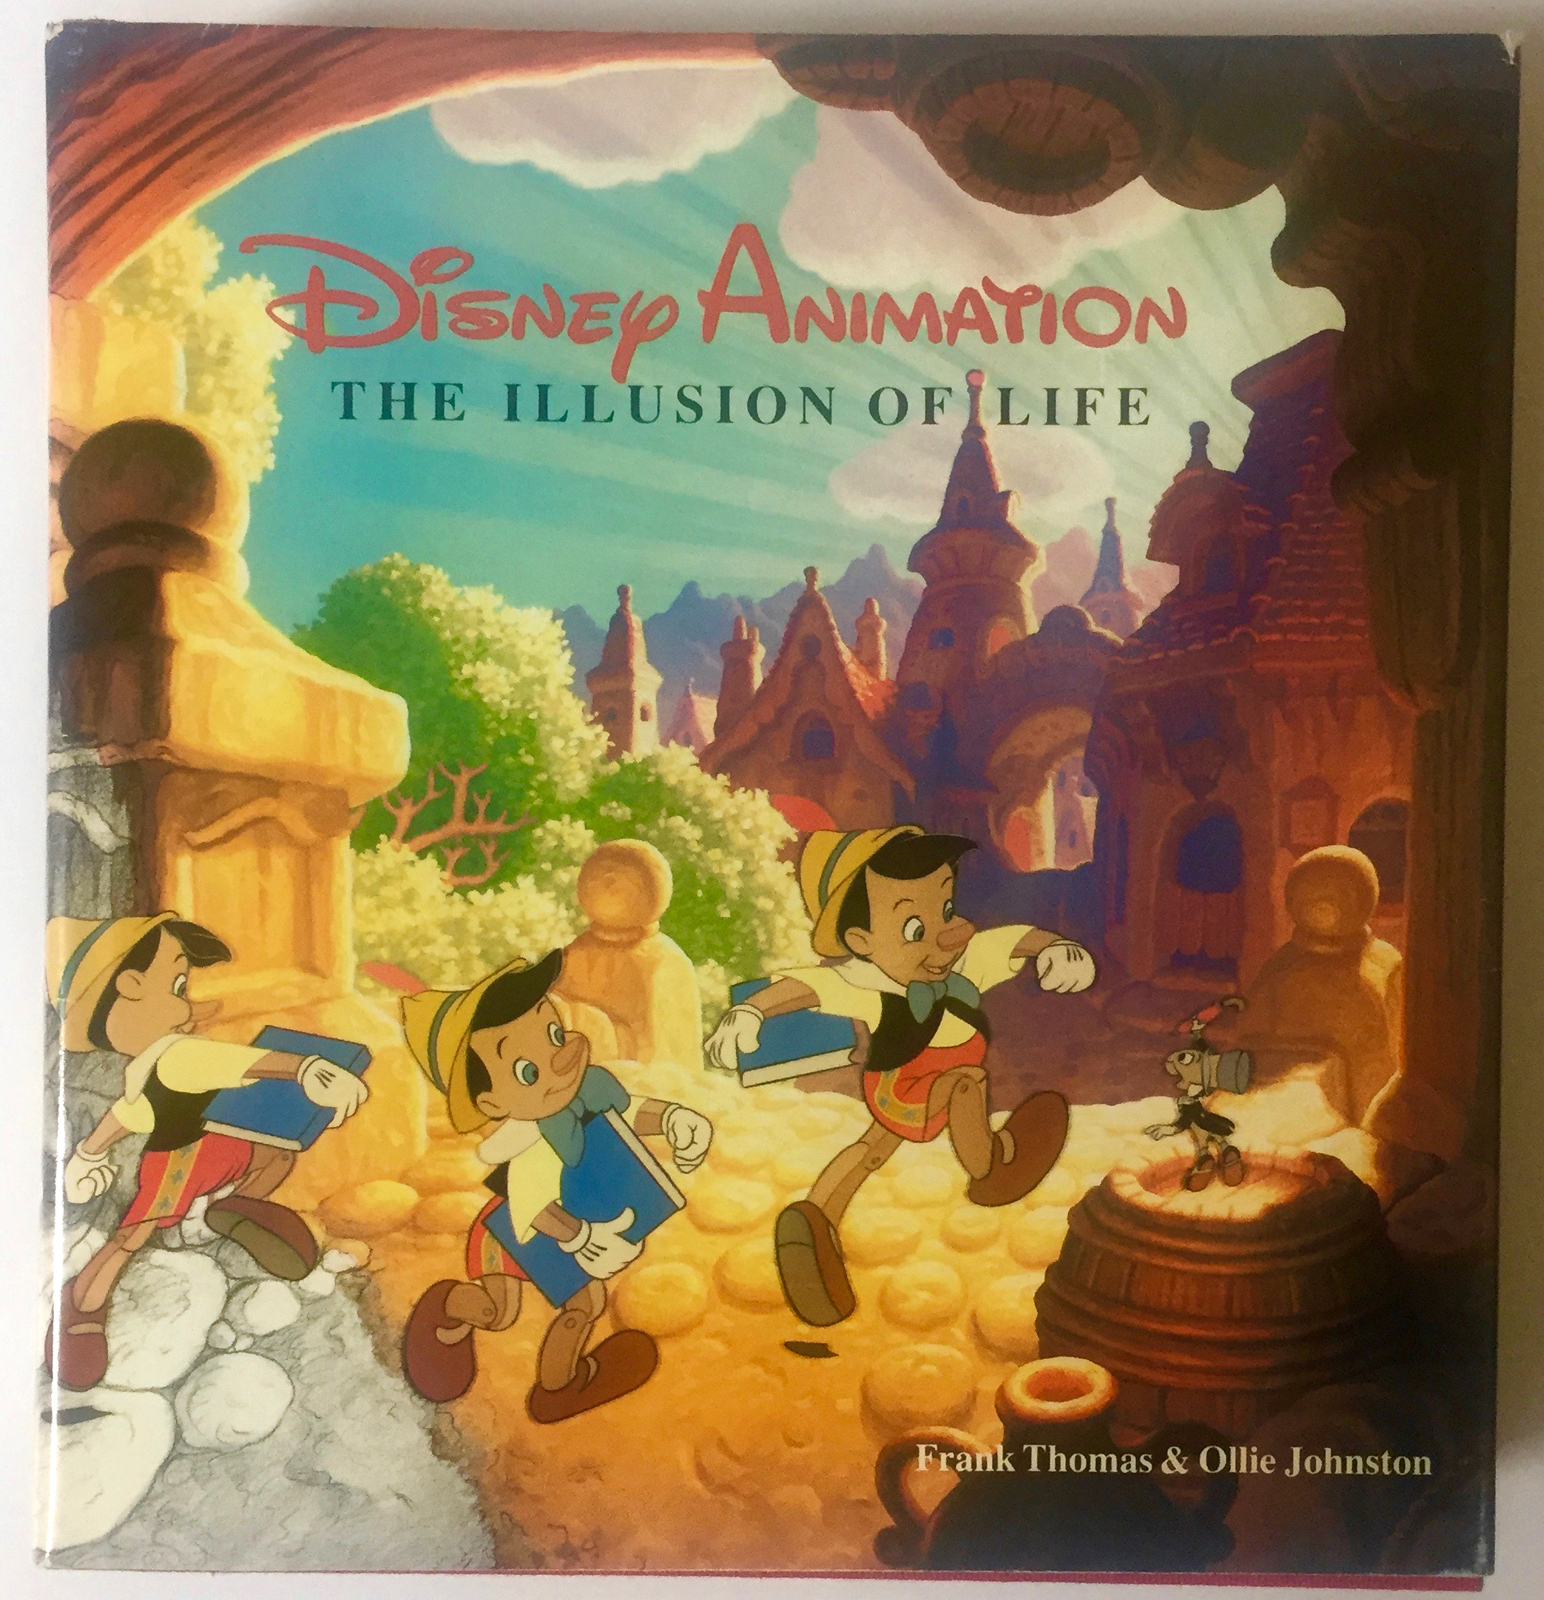 Filmic Light - Snow White Archive: Disney Animation - The Illusion of Life